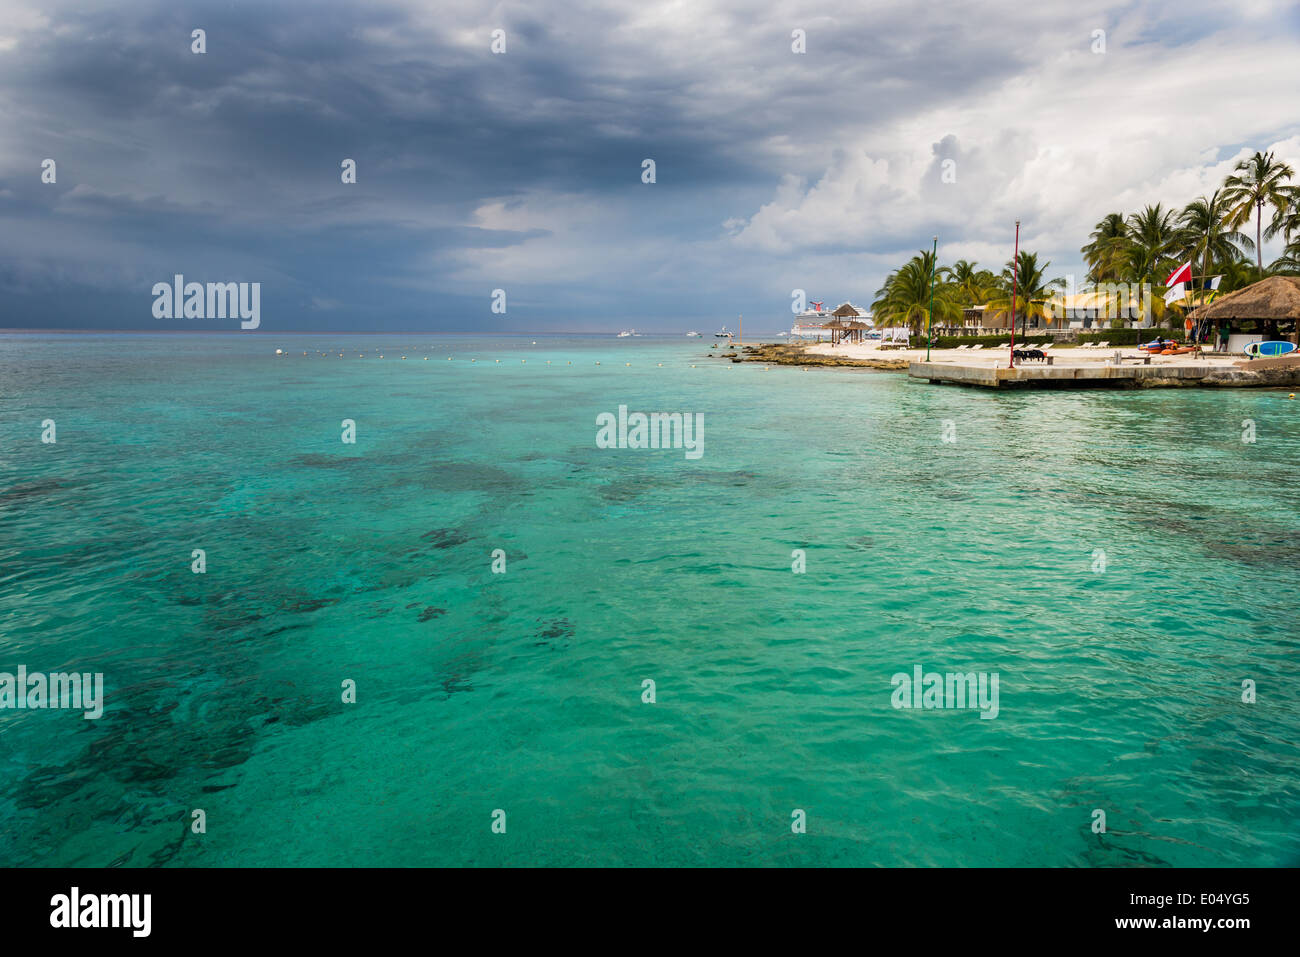 Palm trees and grass huts at a beach resort. Cozumel, Mexico. Stock Photo